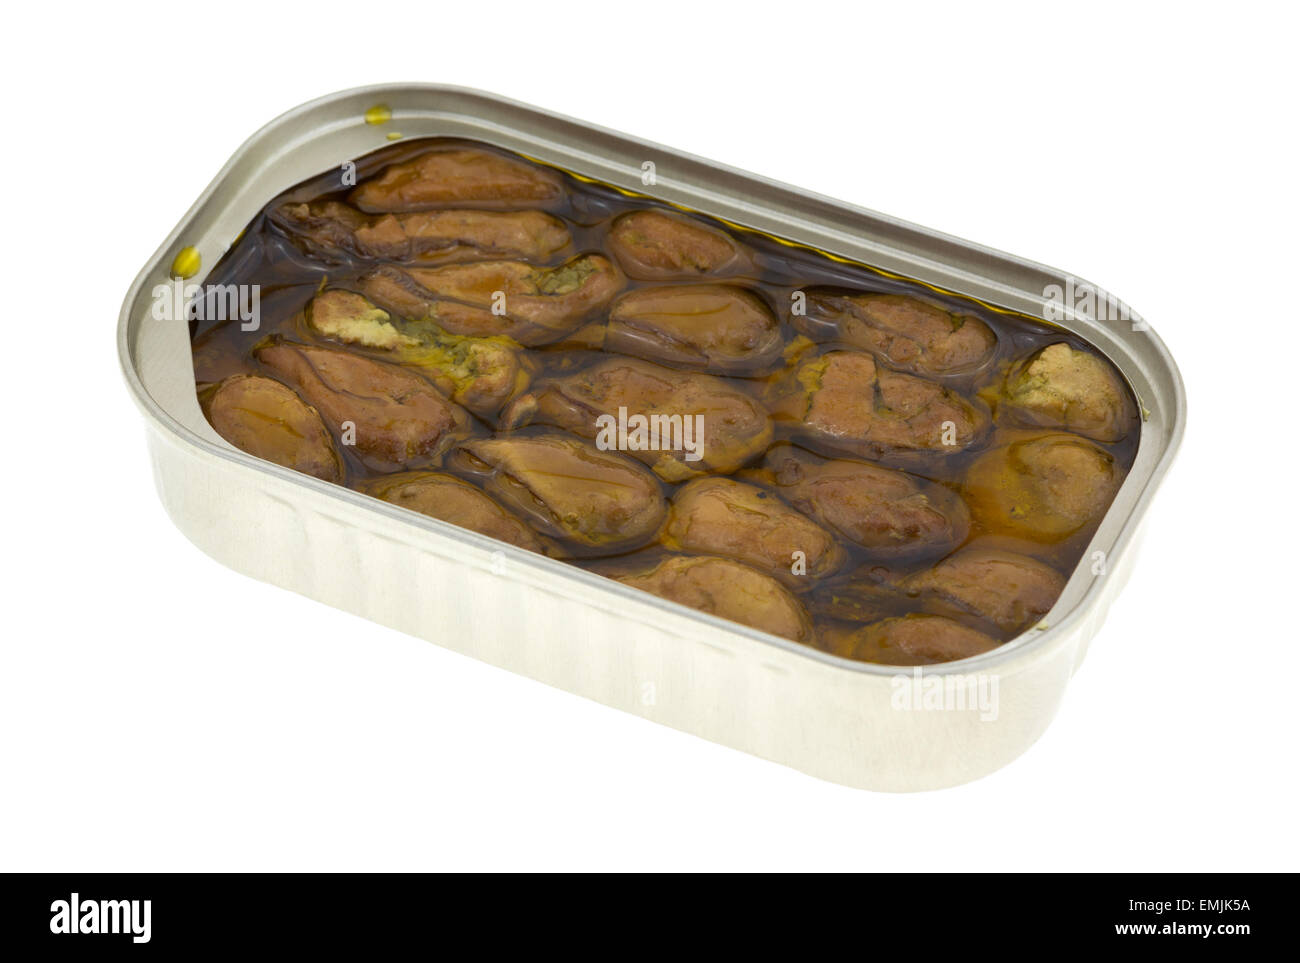 An opened tin of whole smoked small oysters in cottonseed oil isolated on a white background. Stock Photo